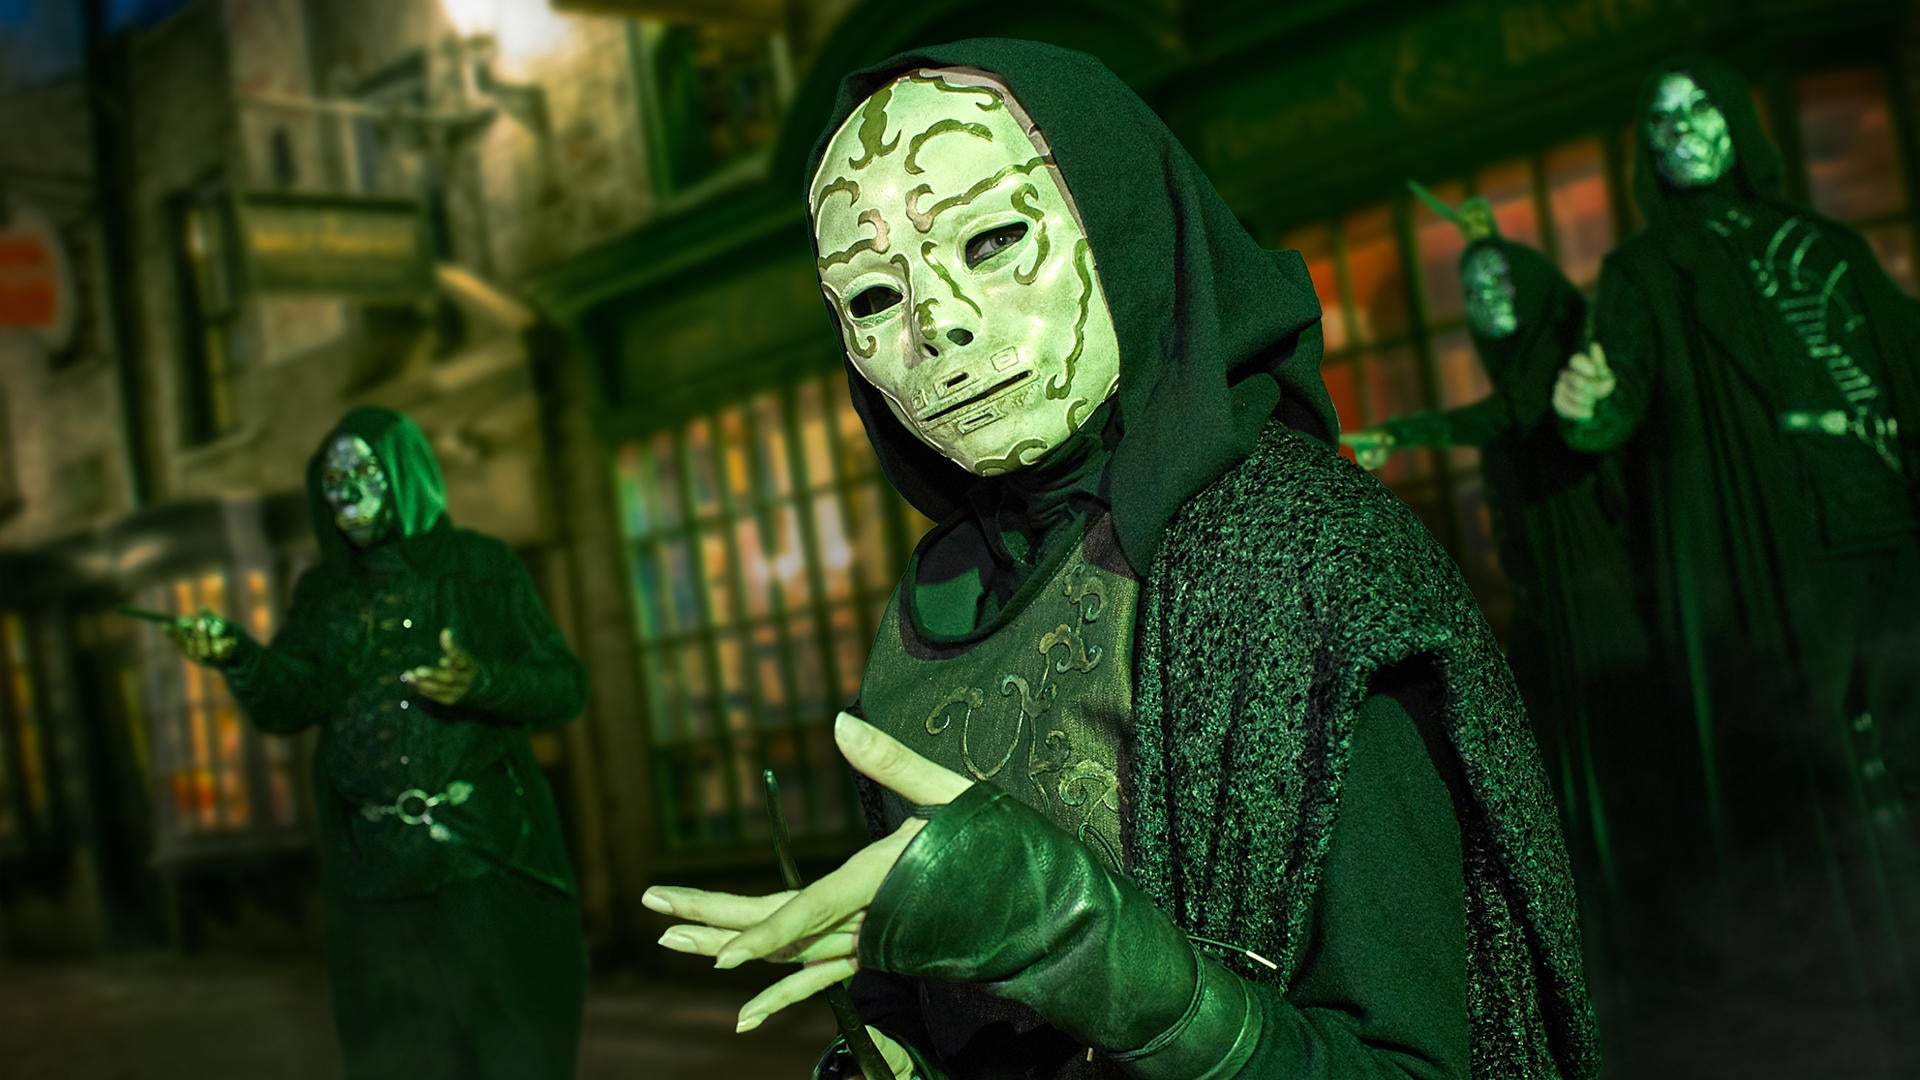 death-eaters-leave-their-mark-on-the-wizarding-world-of-harry-potter-diagon-alley